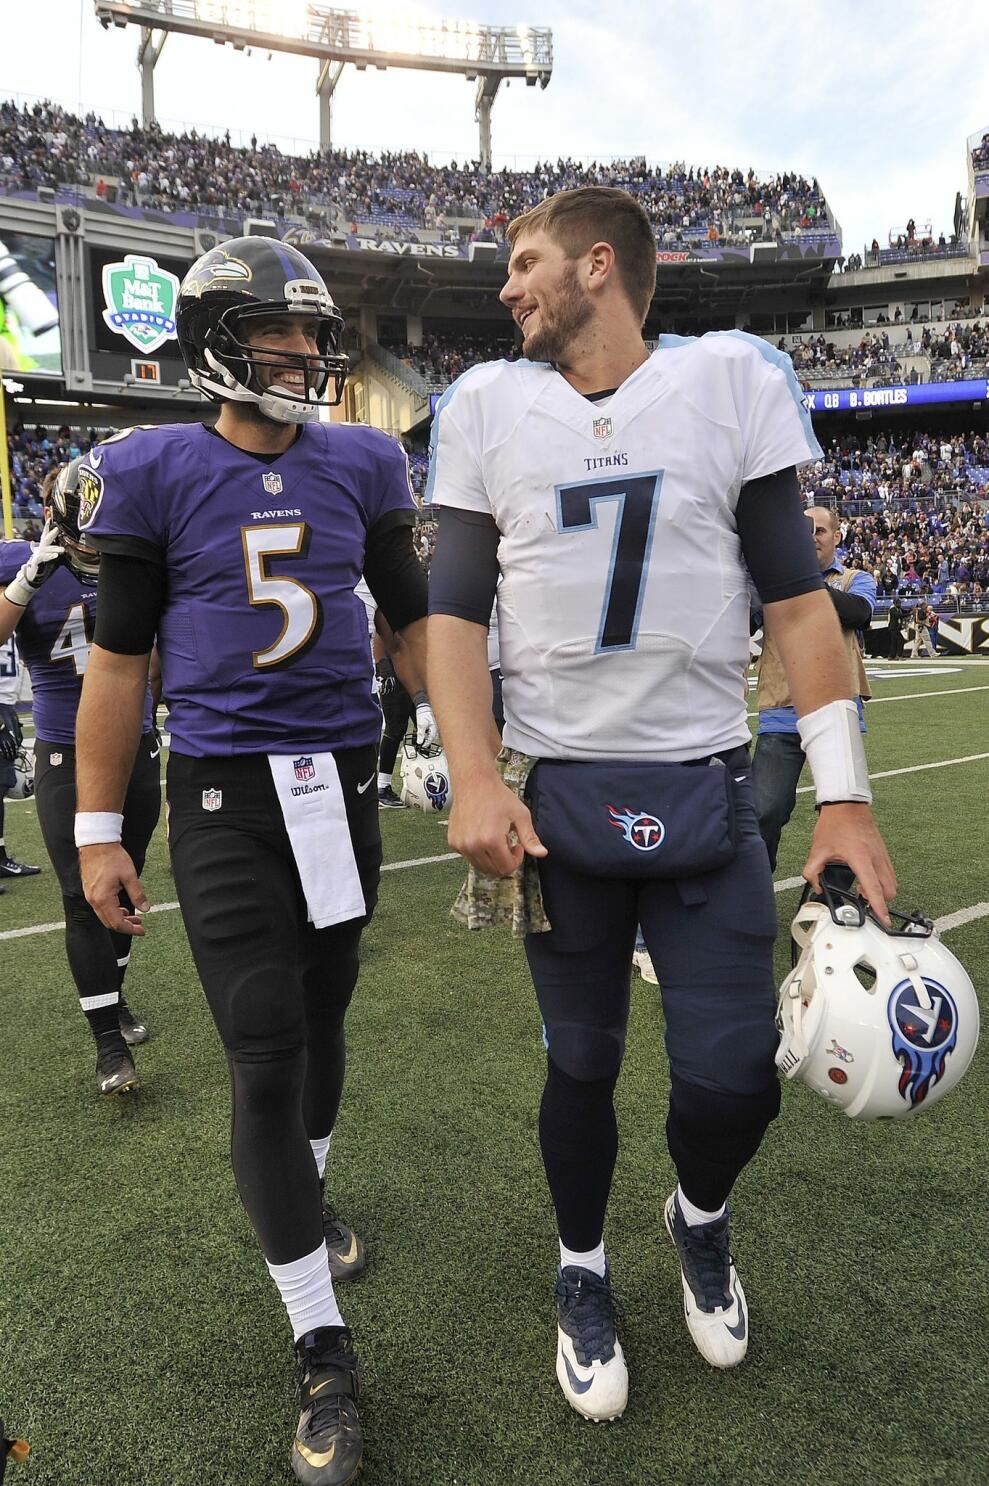 Ravens say good-bye to Titans after 21-7 victory - The San Diego  Union-Tribune